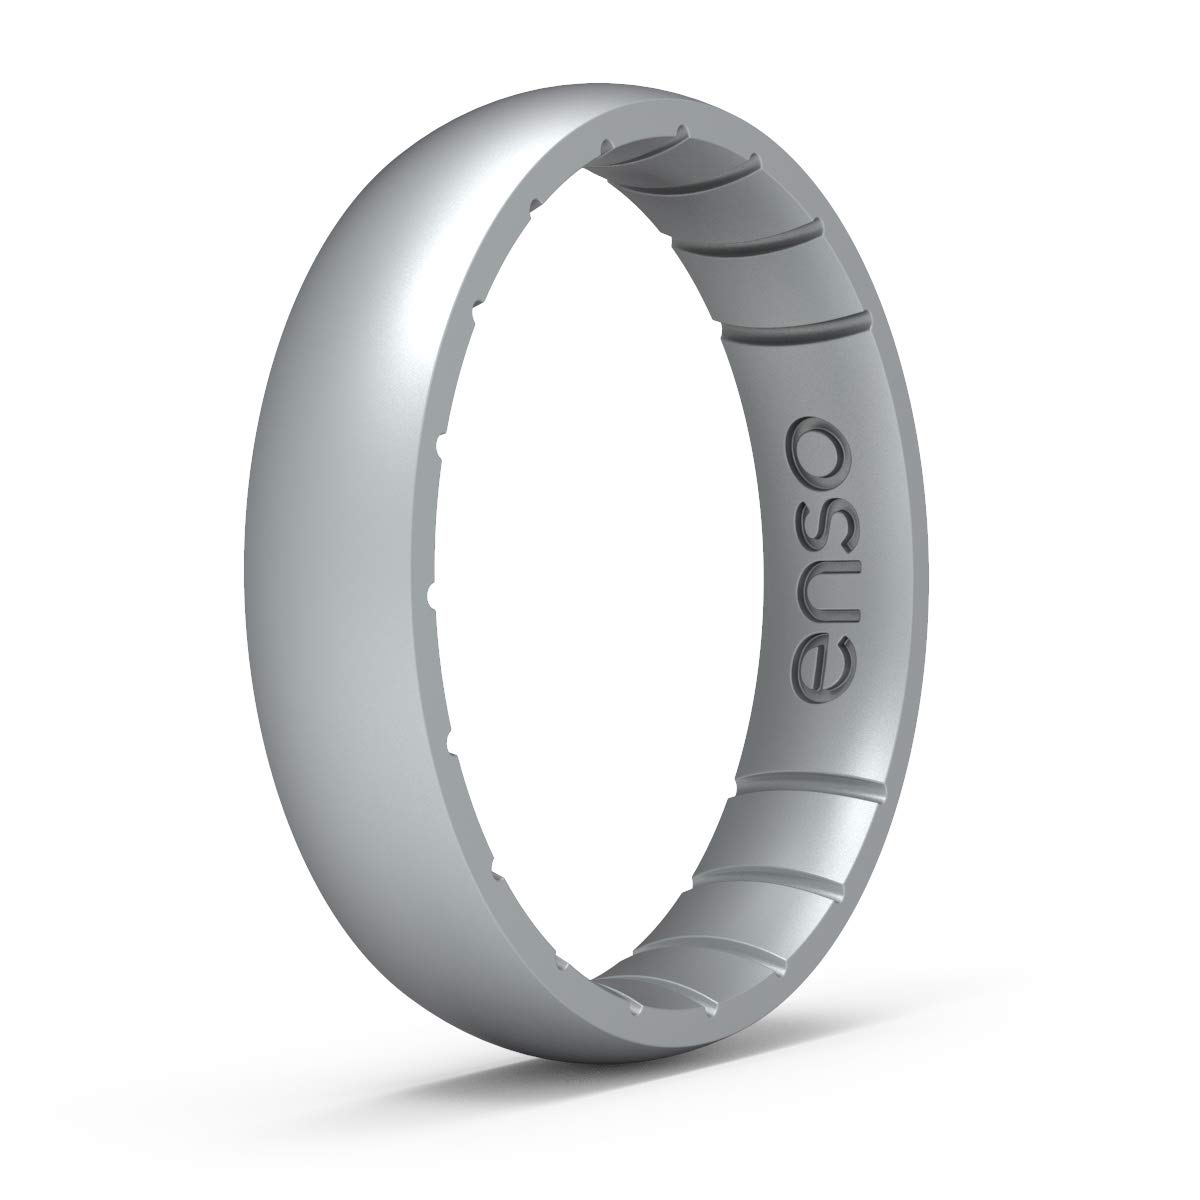 Enso Rings Thin Elements Silicone Ring Infused with Precious Elements – Stackable Wedding Engagement Band – 4.3mm Wide, 1.75mm Thick